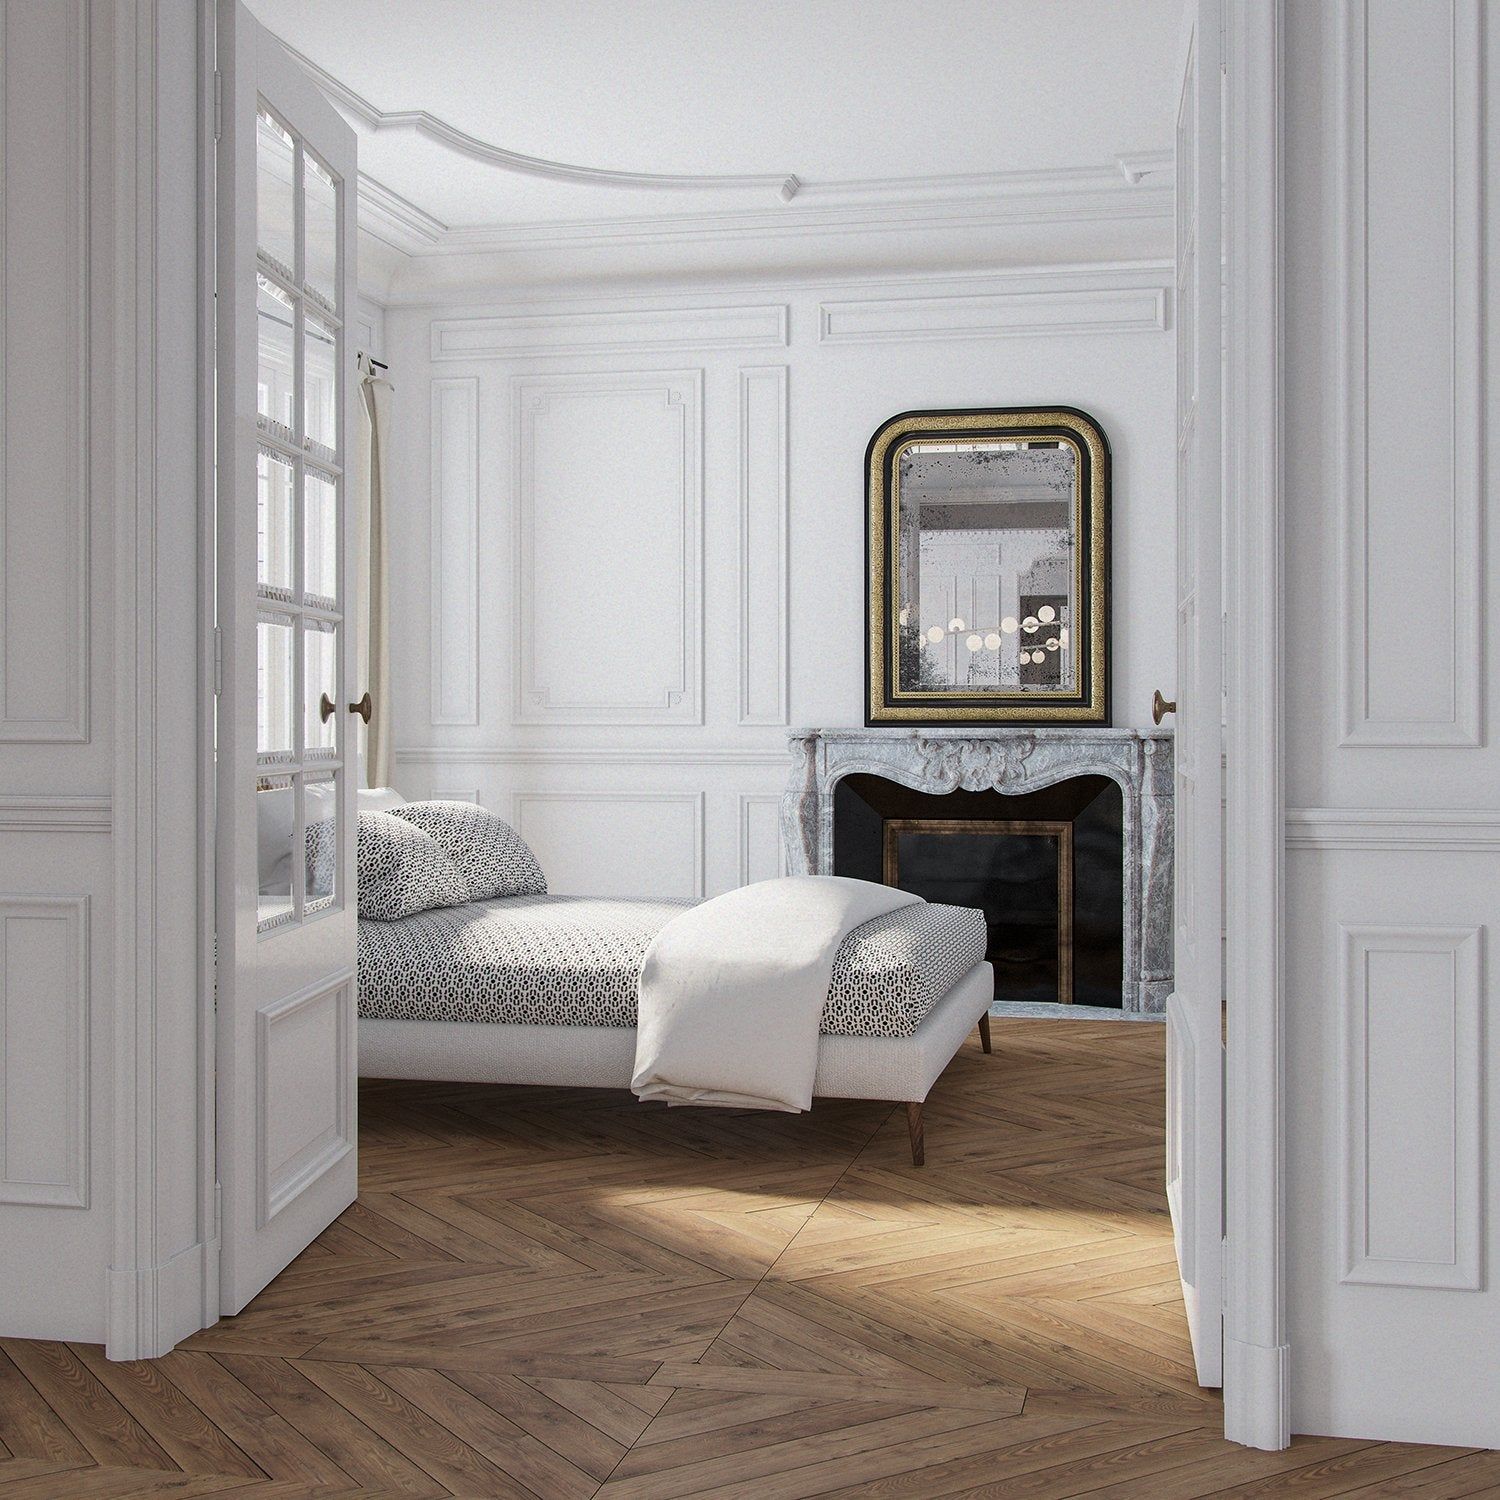 Elegant and Sophisticated: The Appeal of White King Bedroom Sets in Contemporary Design